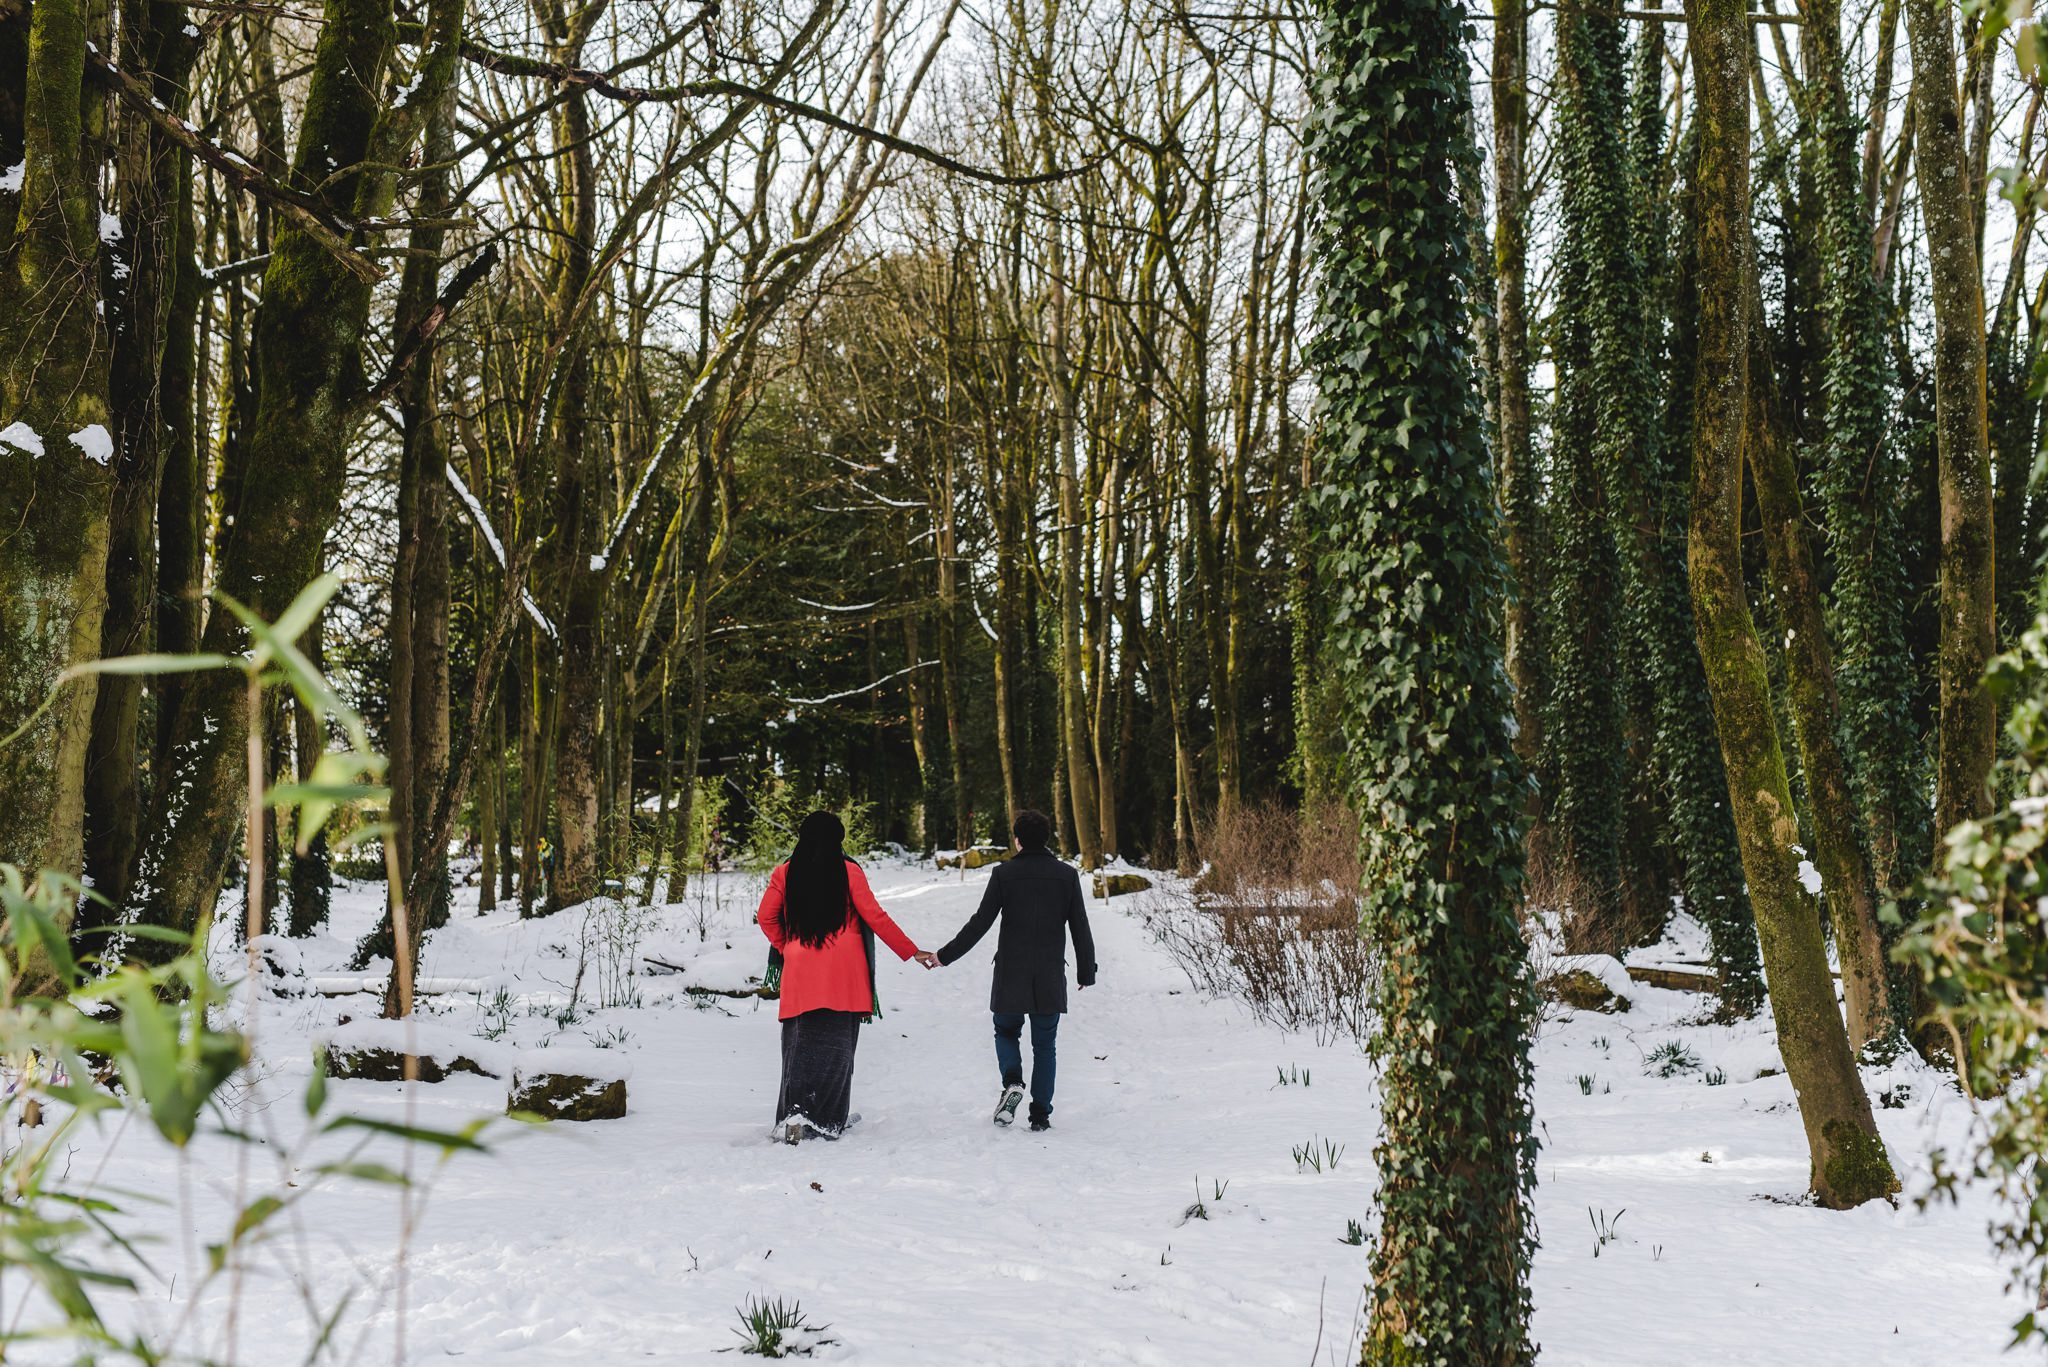 A couple walking hand in hand in a snowy forest